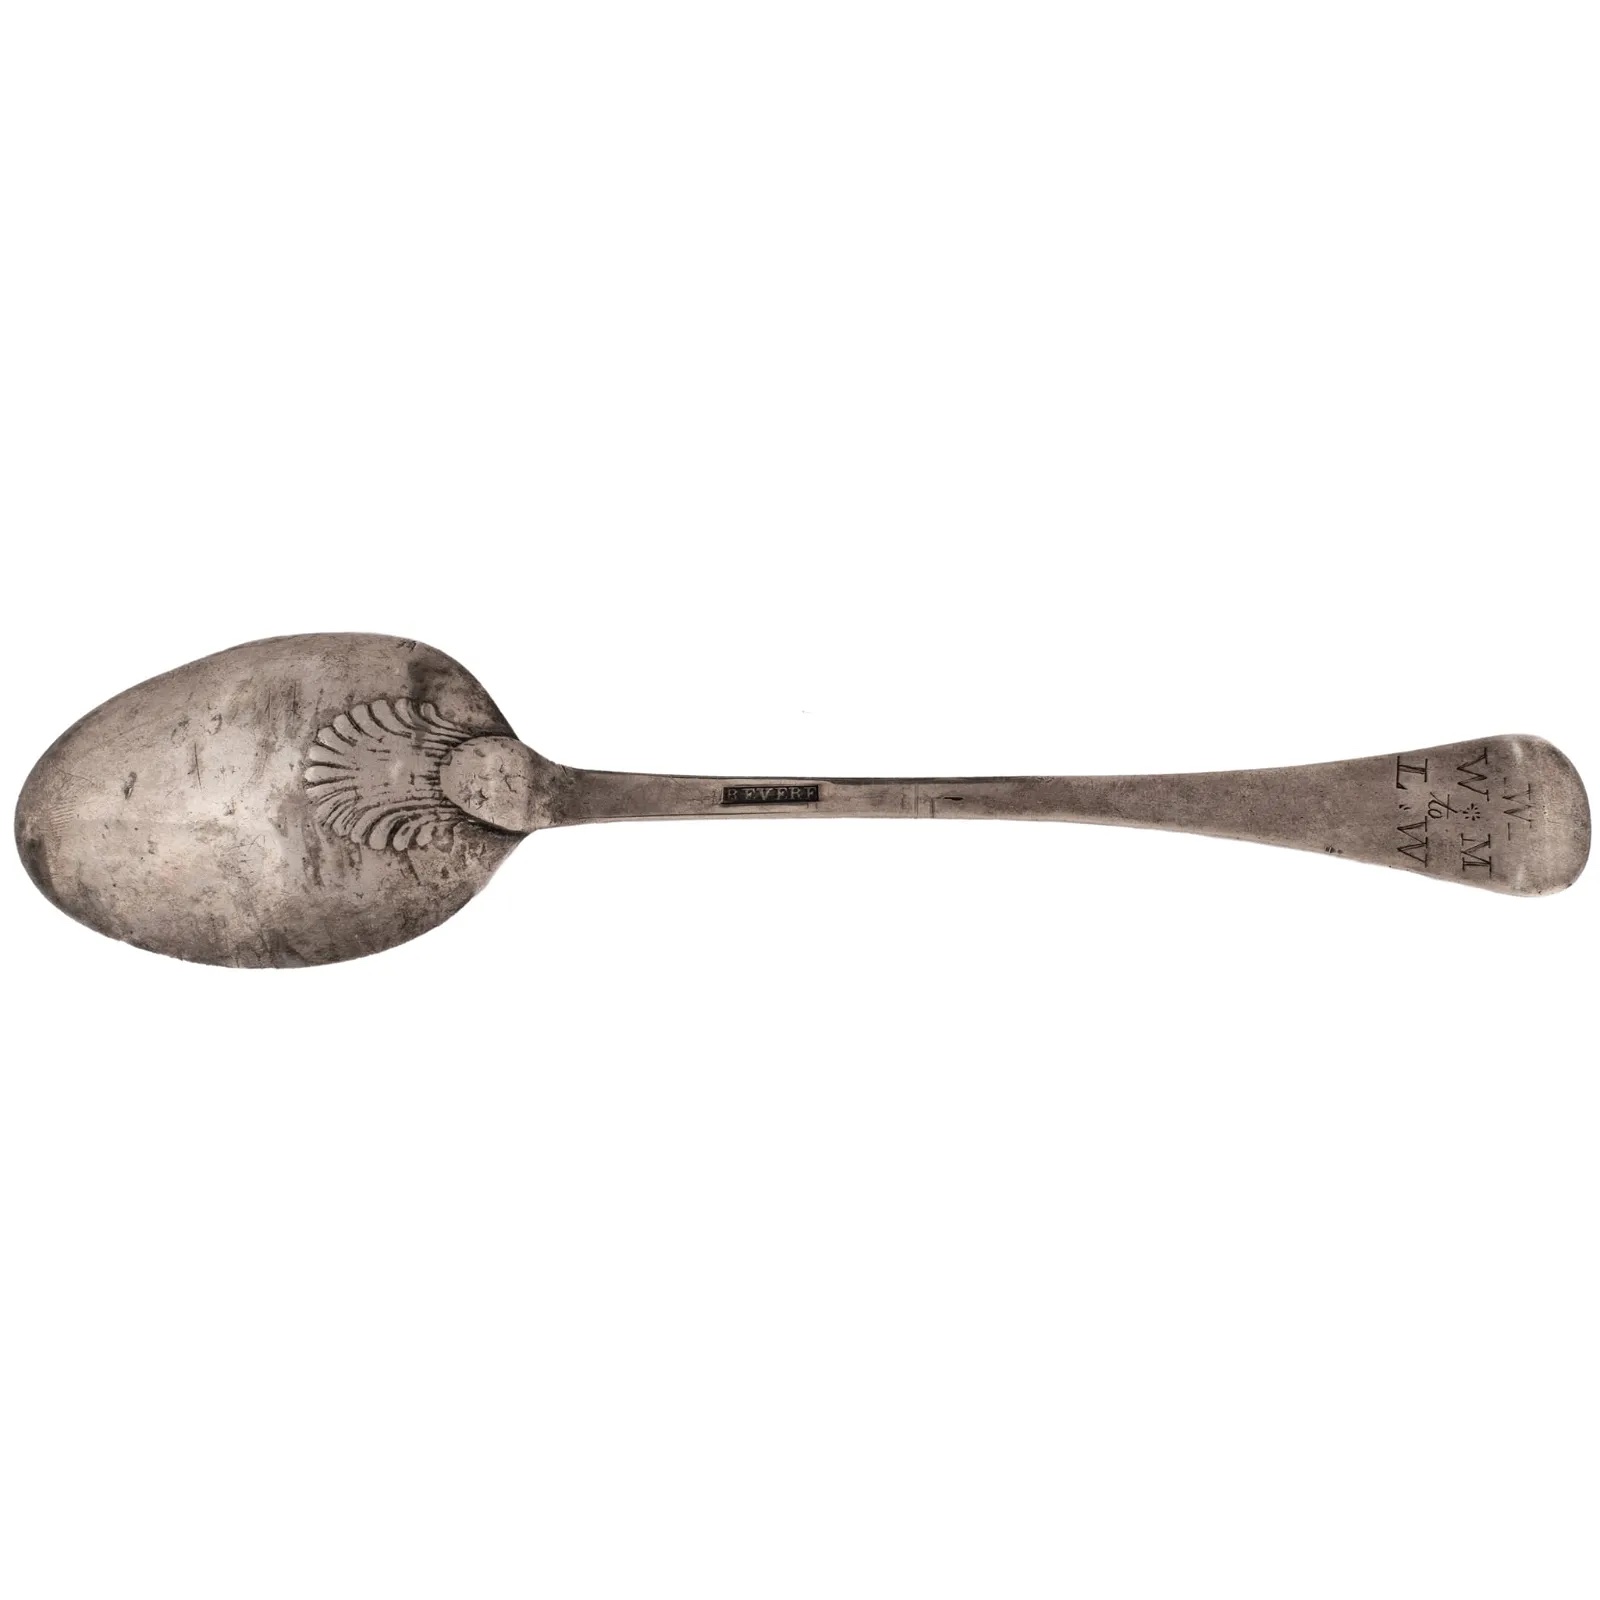 Paul Revere, Jr. spoon, estimated at $12,000-$18,000 at Early American.